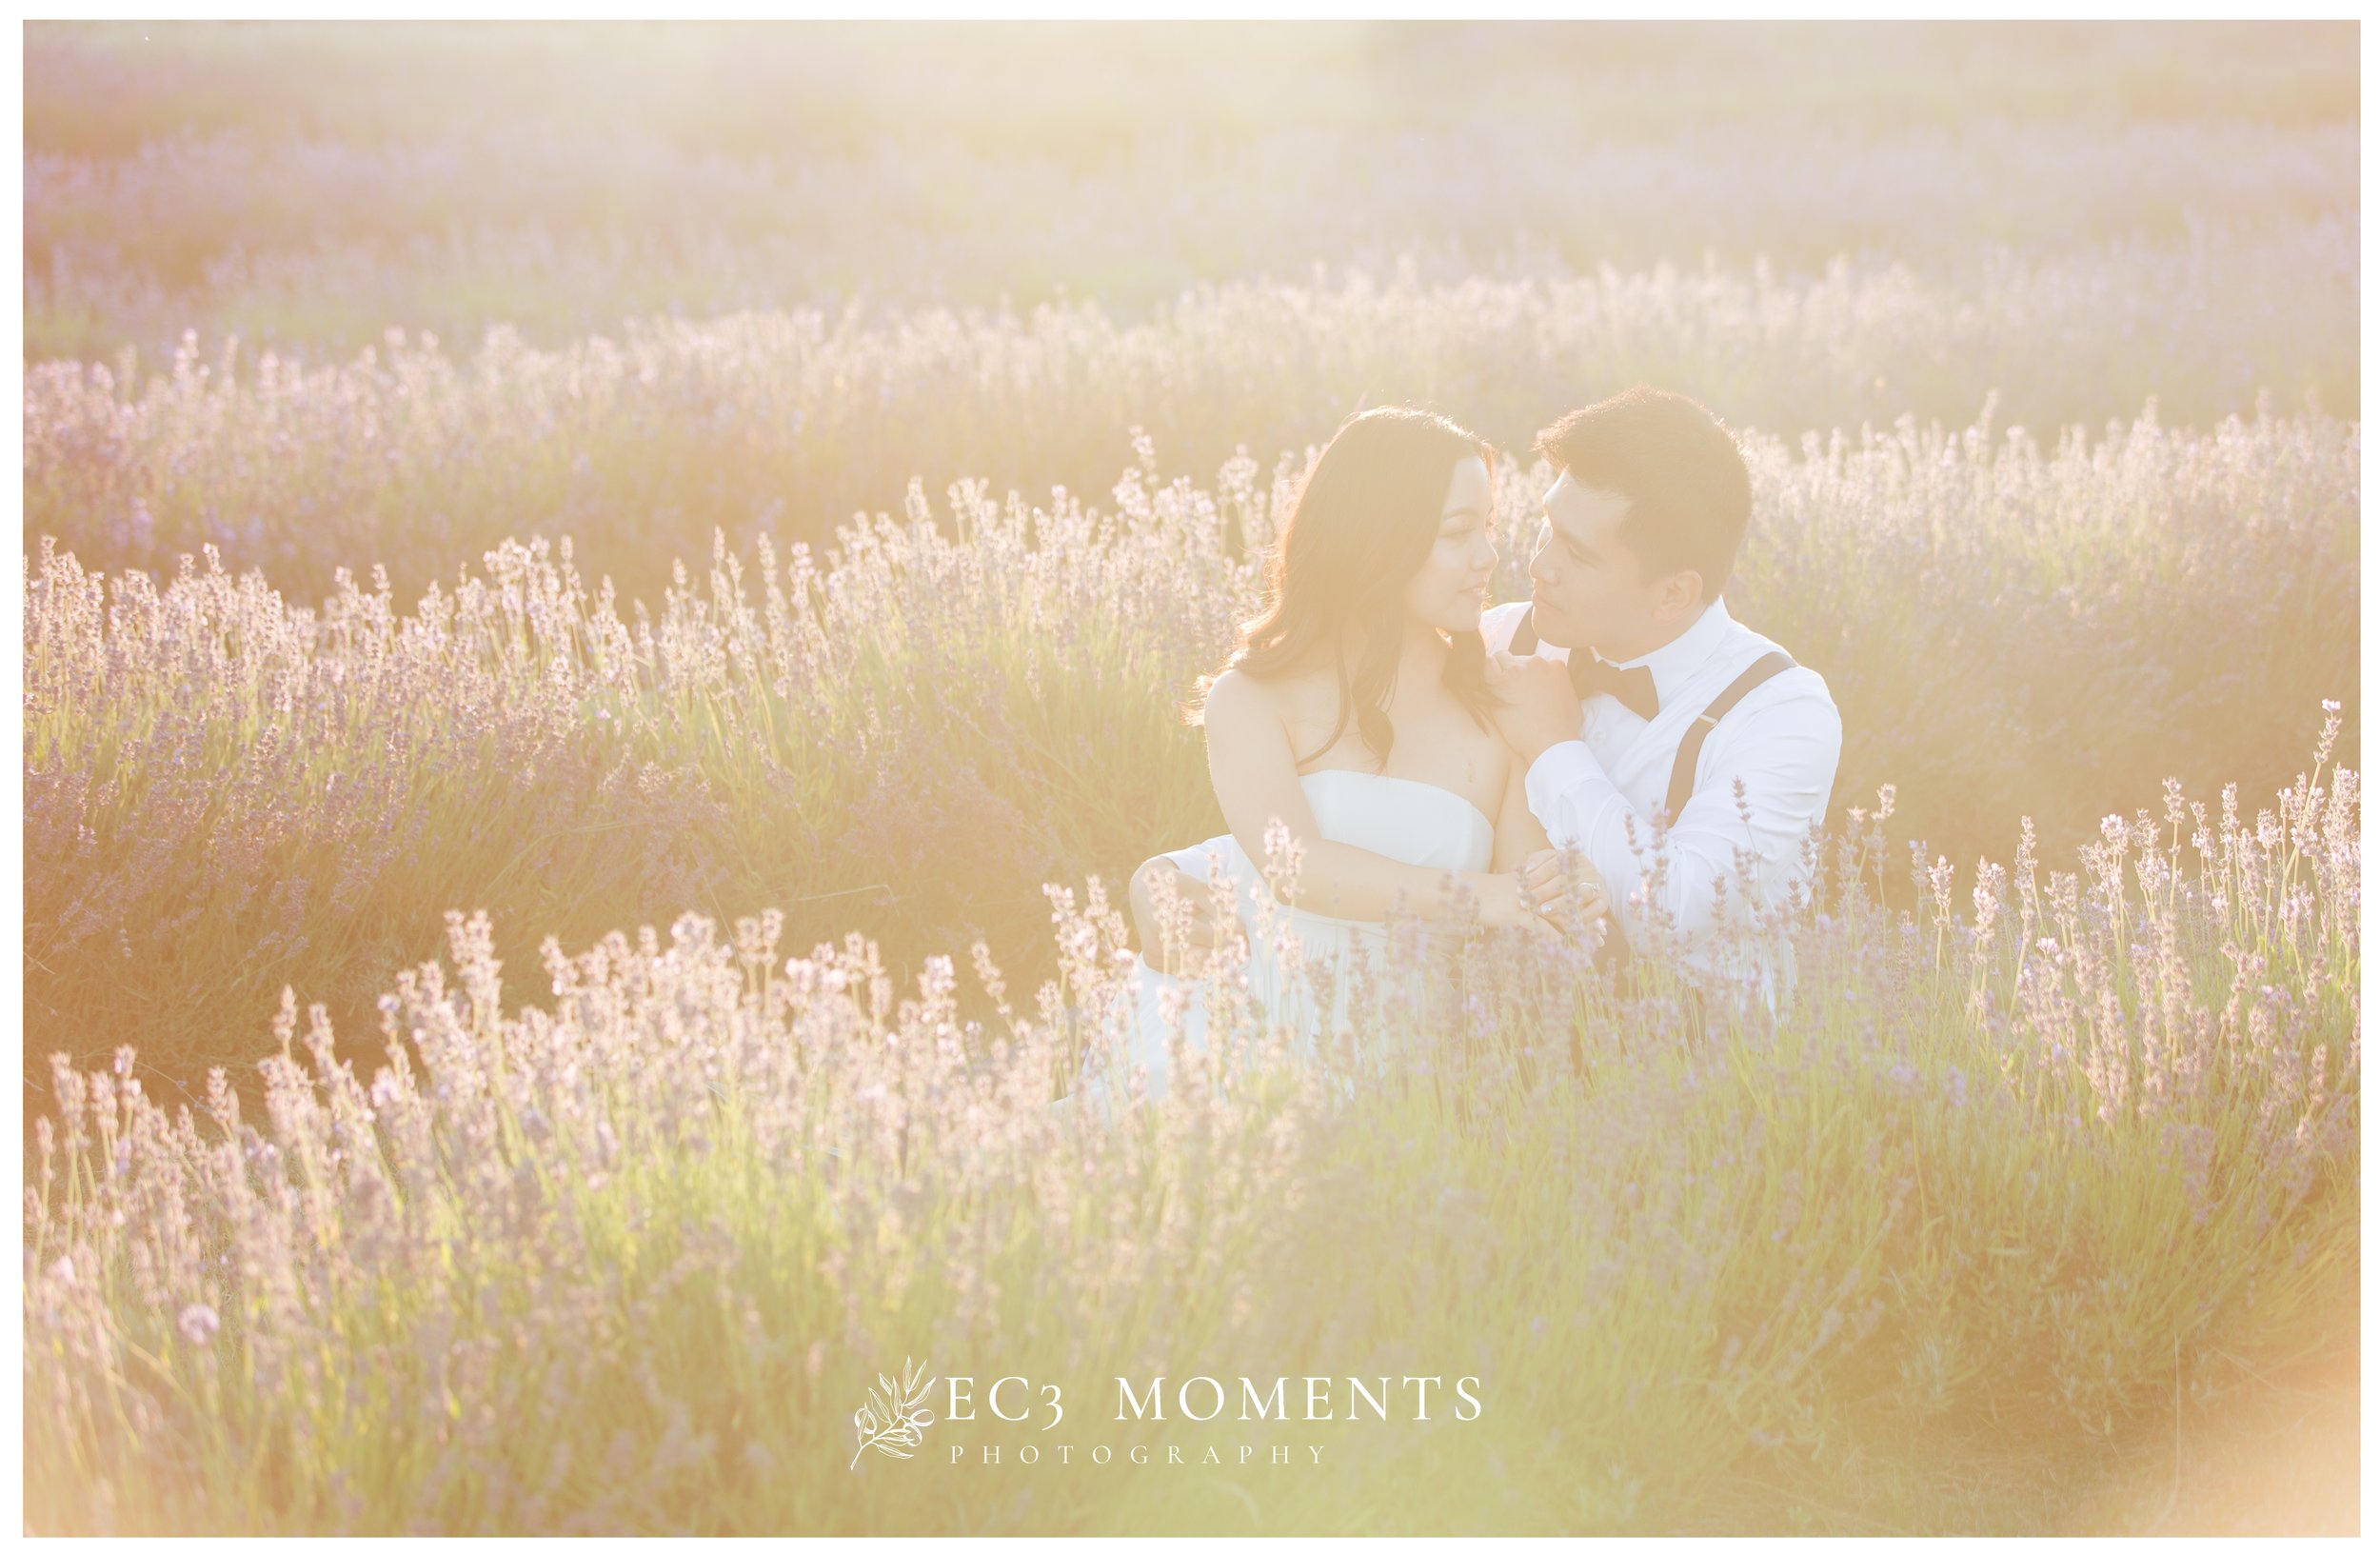  Captured at Bonnieheath Estate Lavender and Winery by EC3 Moments 